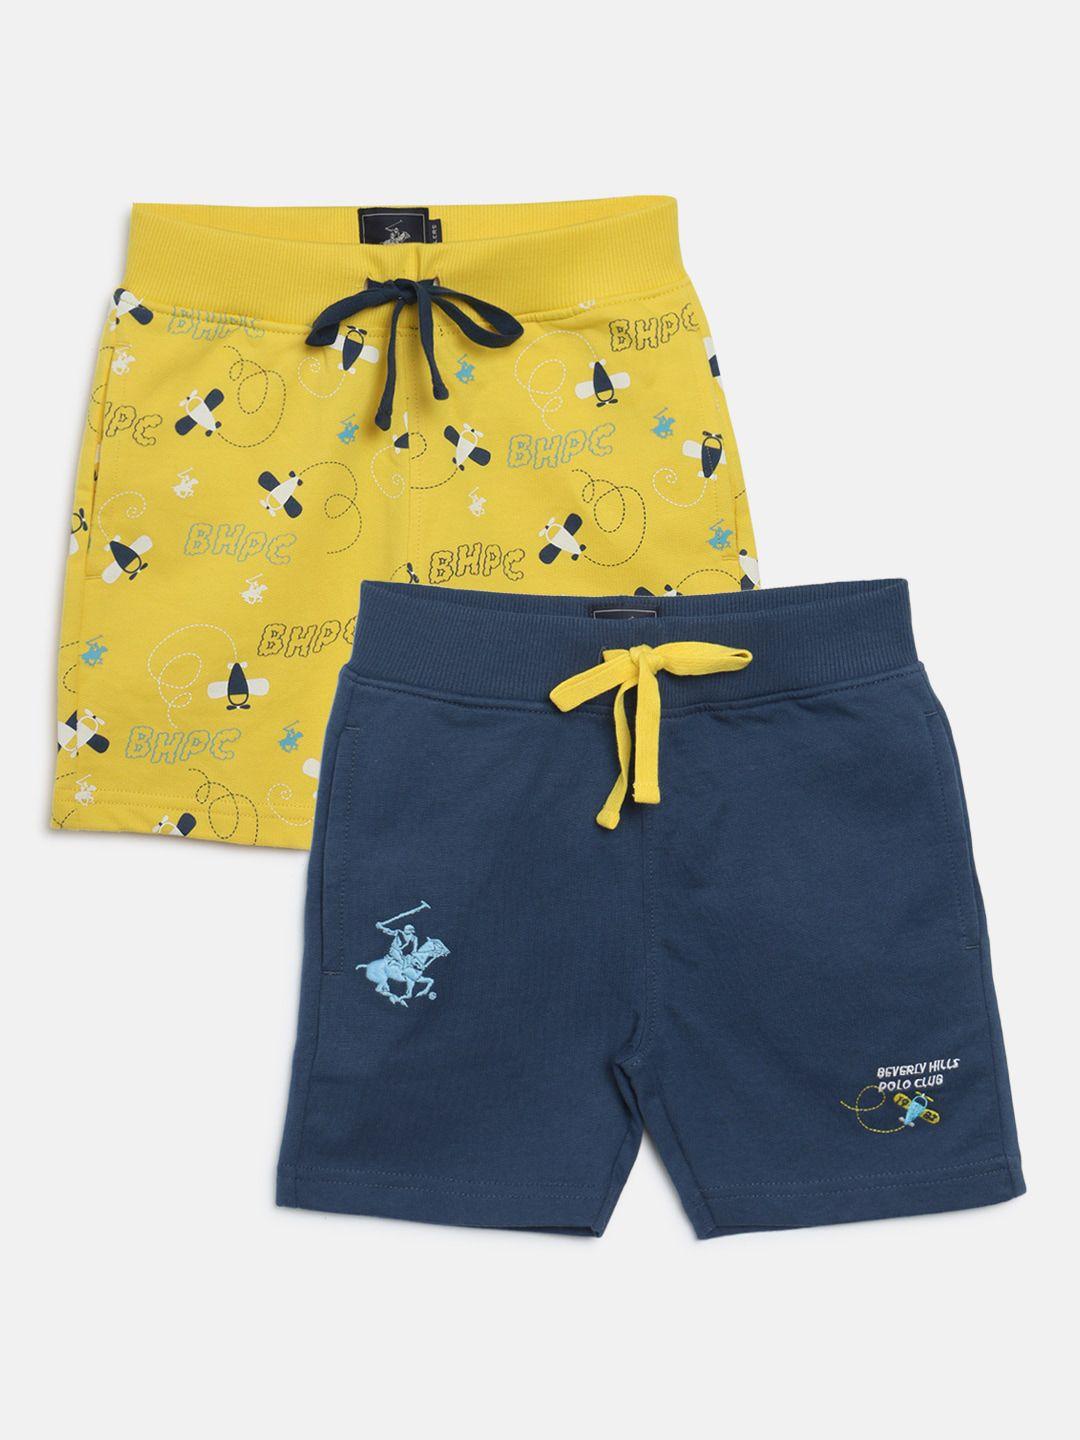 beverly hills polo club boys pack of 2 mid-rise typography printed pure cotton shorts